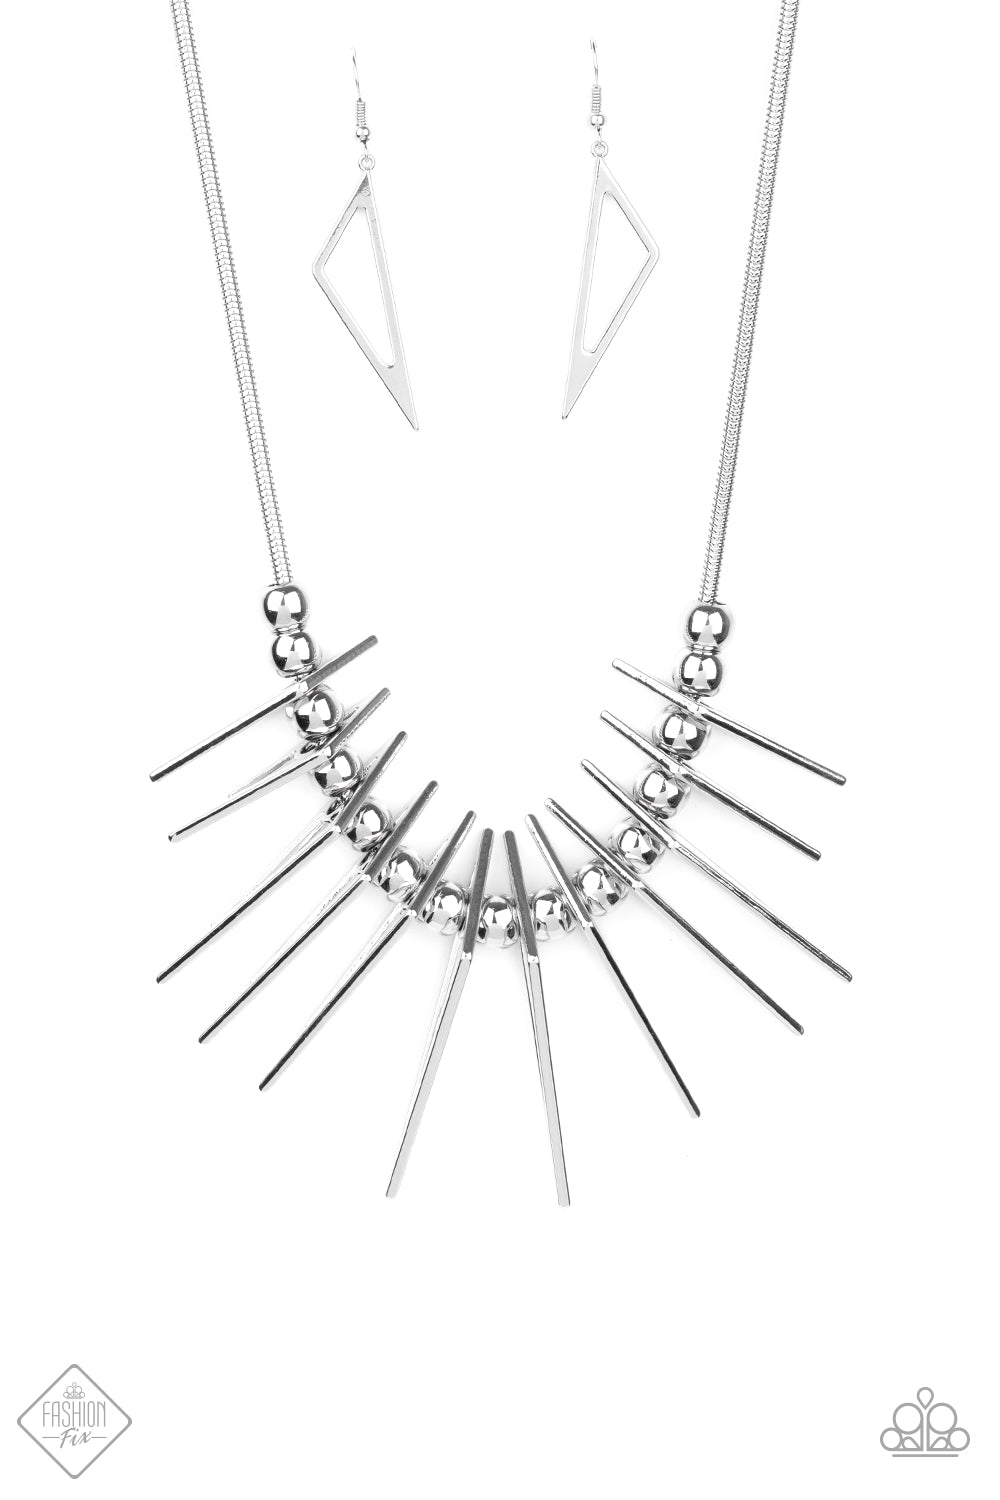 Fully Charged - Silver Necklace Fashion Fix Dec 2020